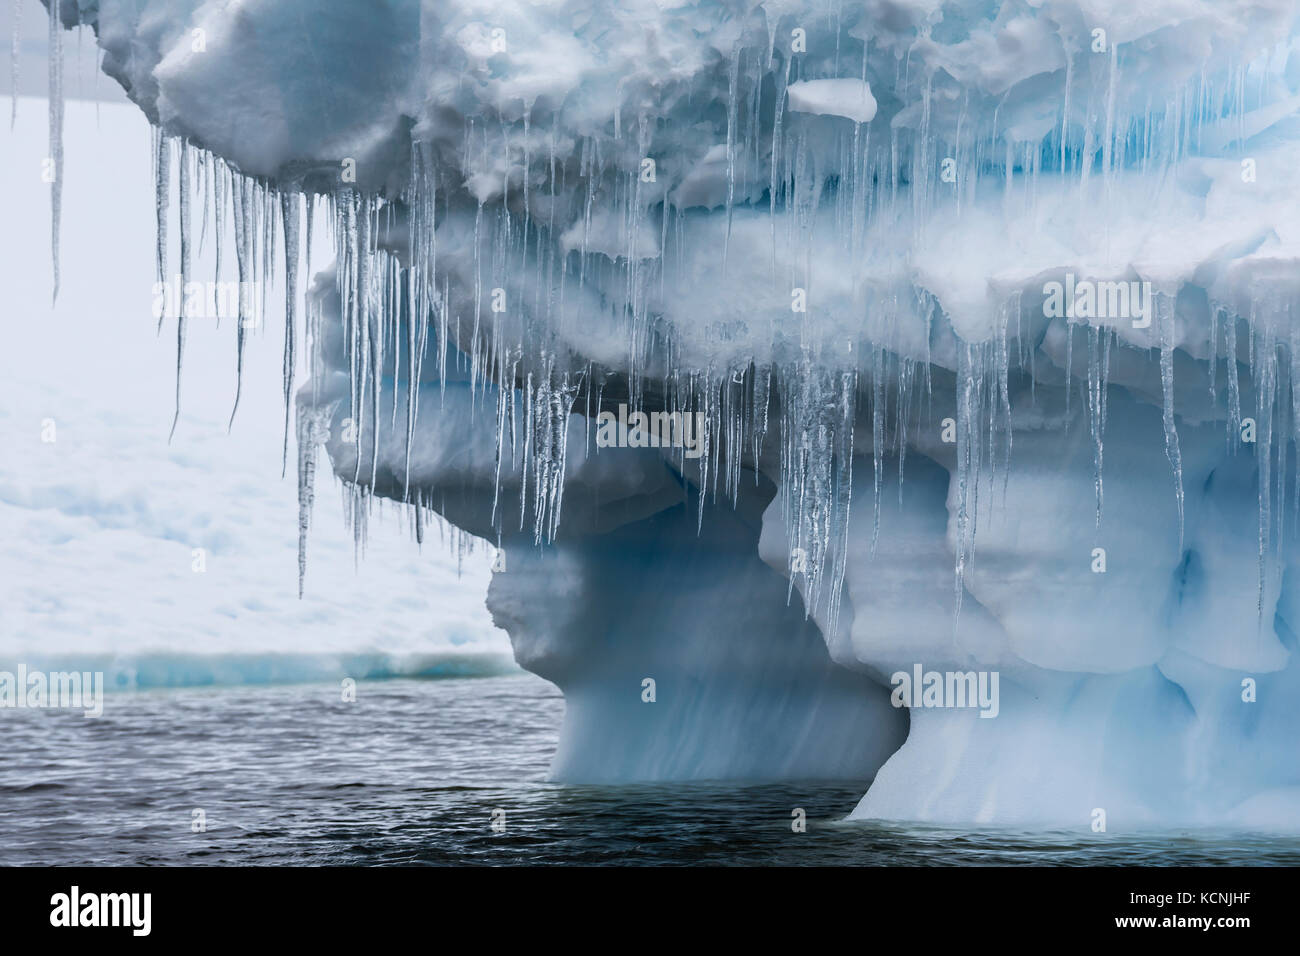 Large icicles hang from an undercut iceberg grounded in water near Pleneau Island,  Antarctic Peninsula Stock Photo